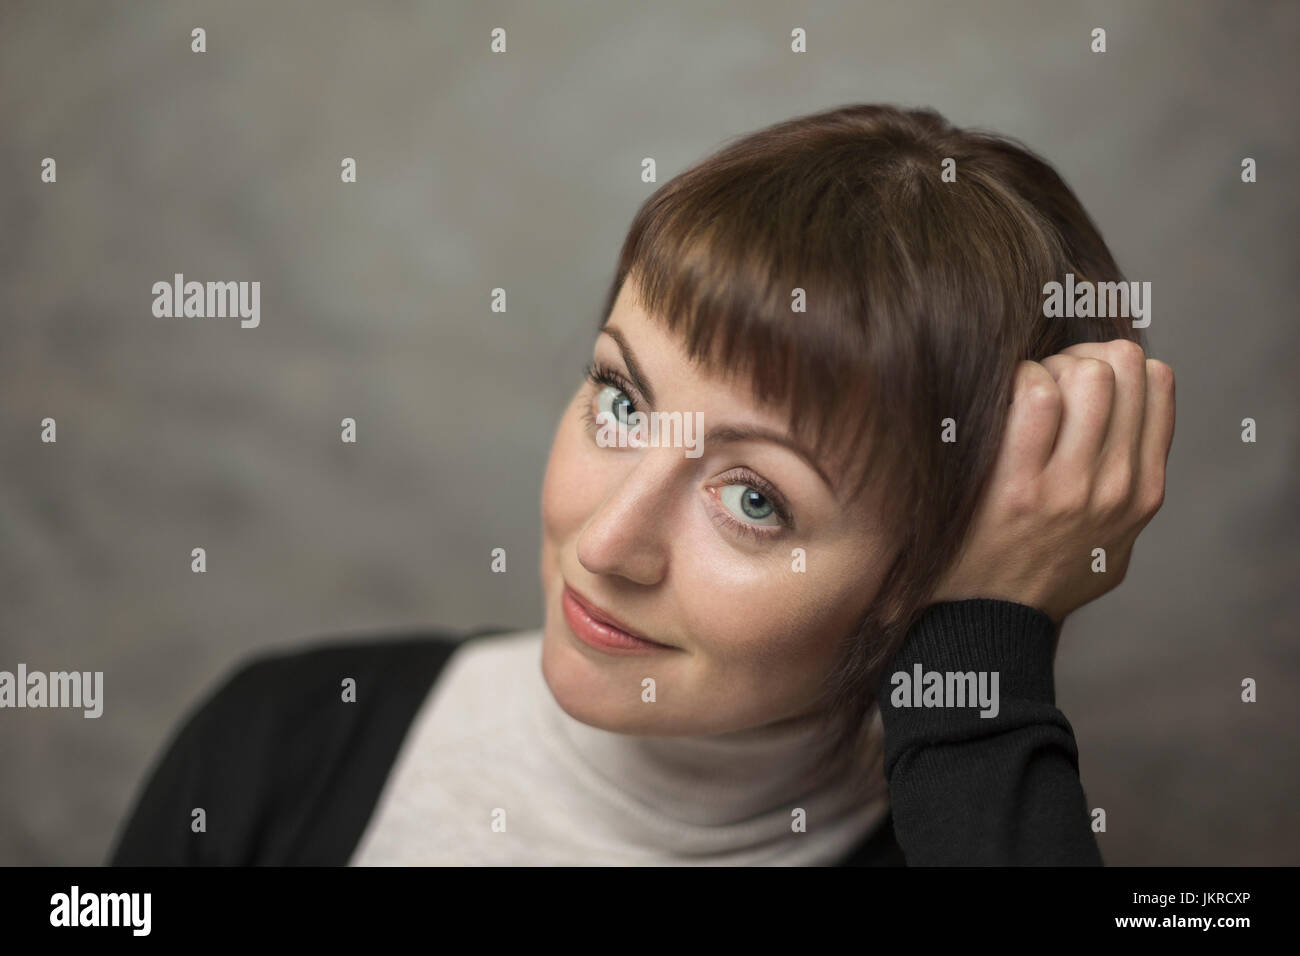 Portrait of smiling mid adult woman with head in hand against gray background Stock Photo